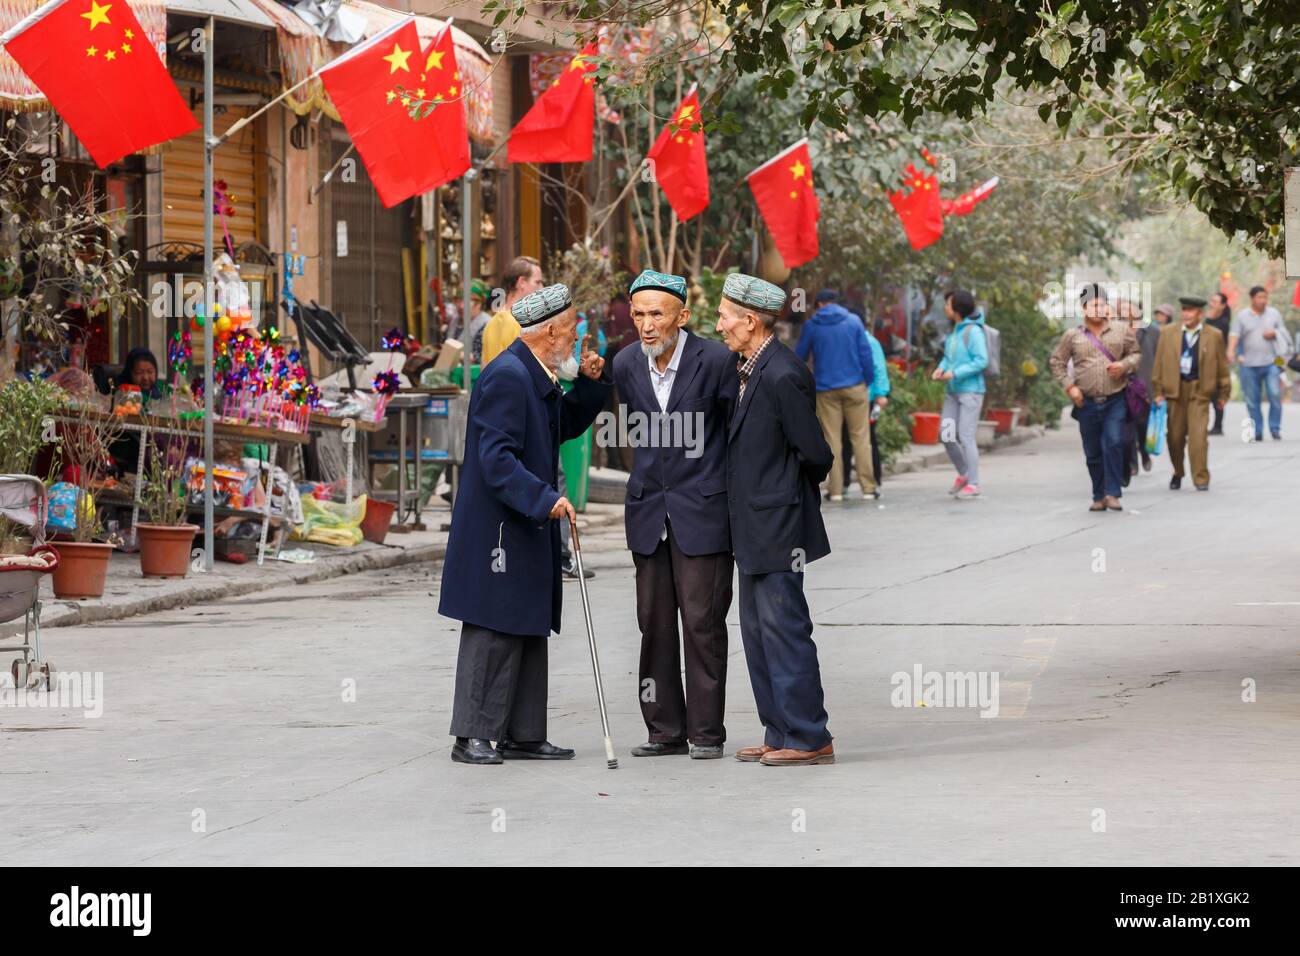 Three elderly men of the Uyghur minority having a conversation at a street in Kashgar Old Town. Chinese flags are mounted on the house in the back. Stock Photo